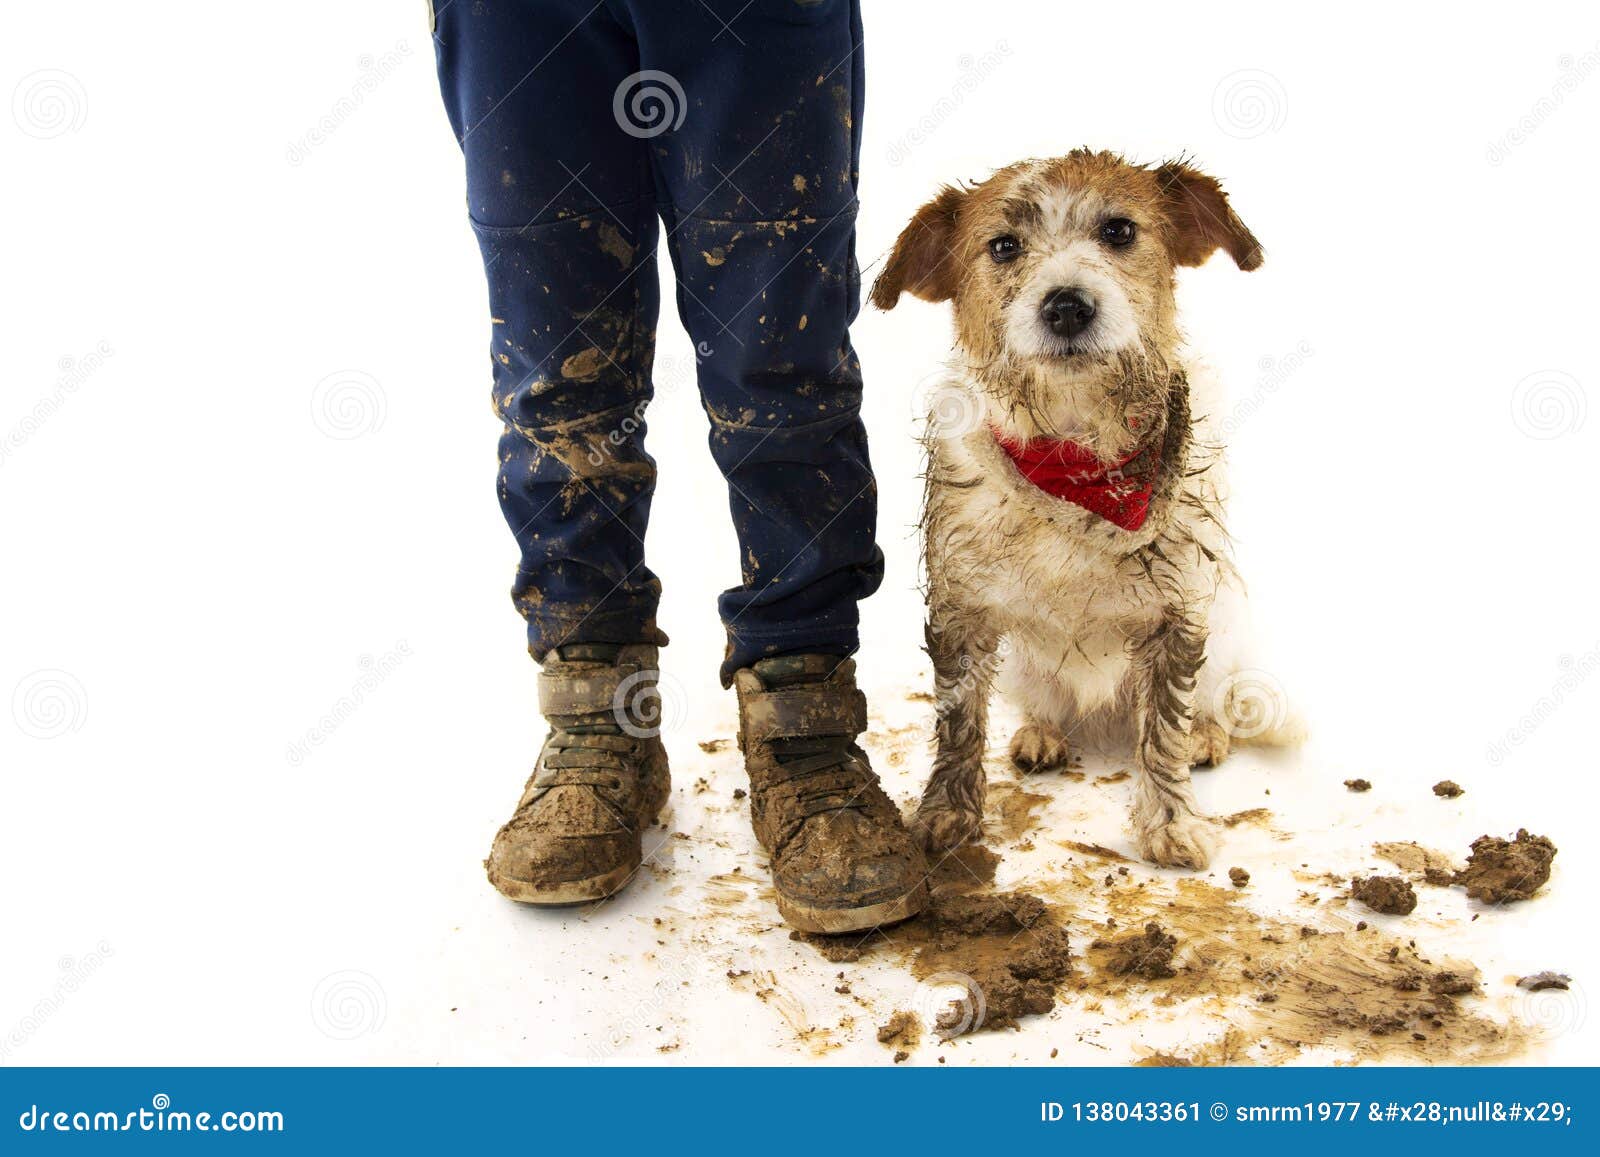 funny dirty dog and child. jack russell dog and boy wearing boots after play in a mud puddle with ashamed expression. 